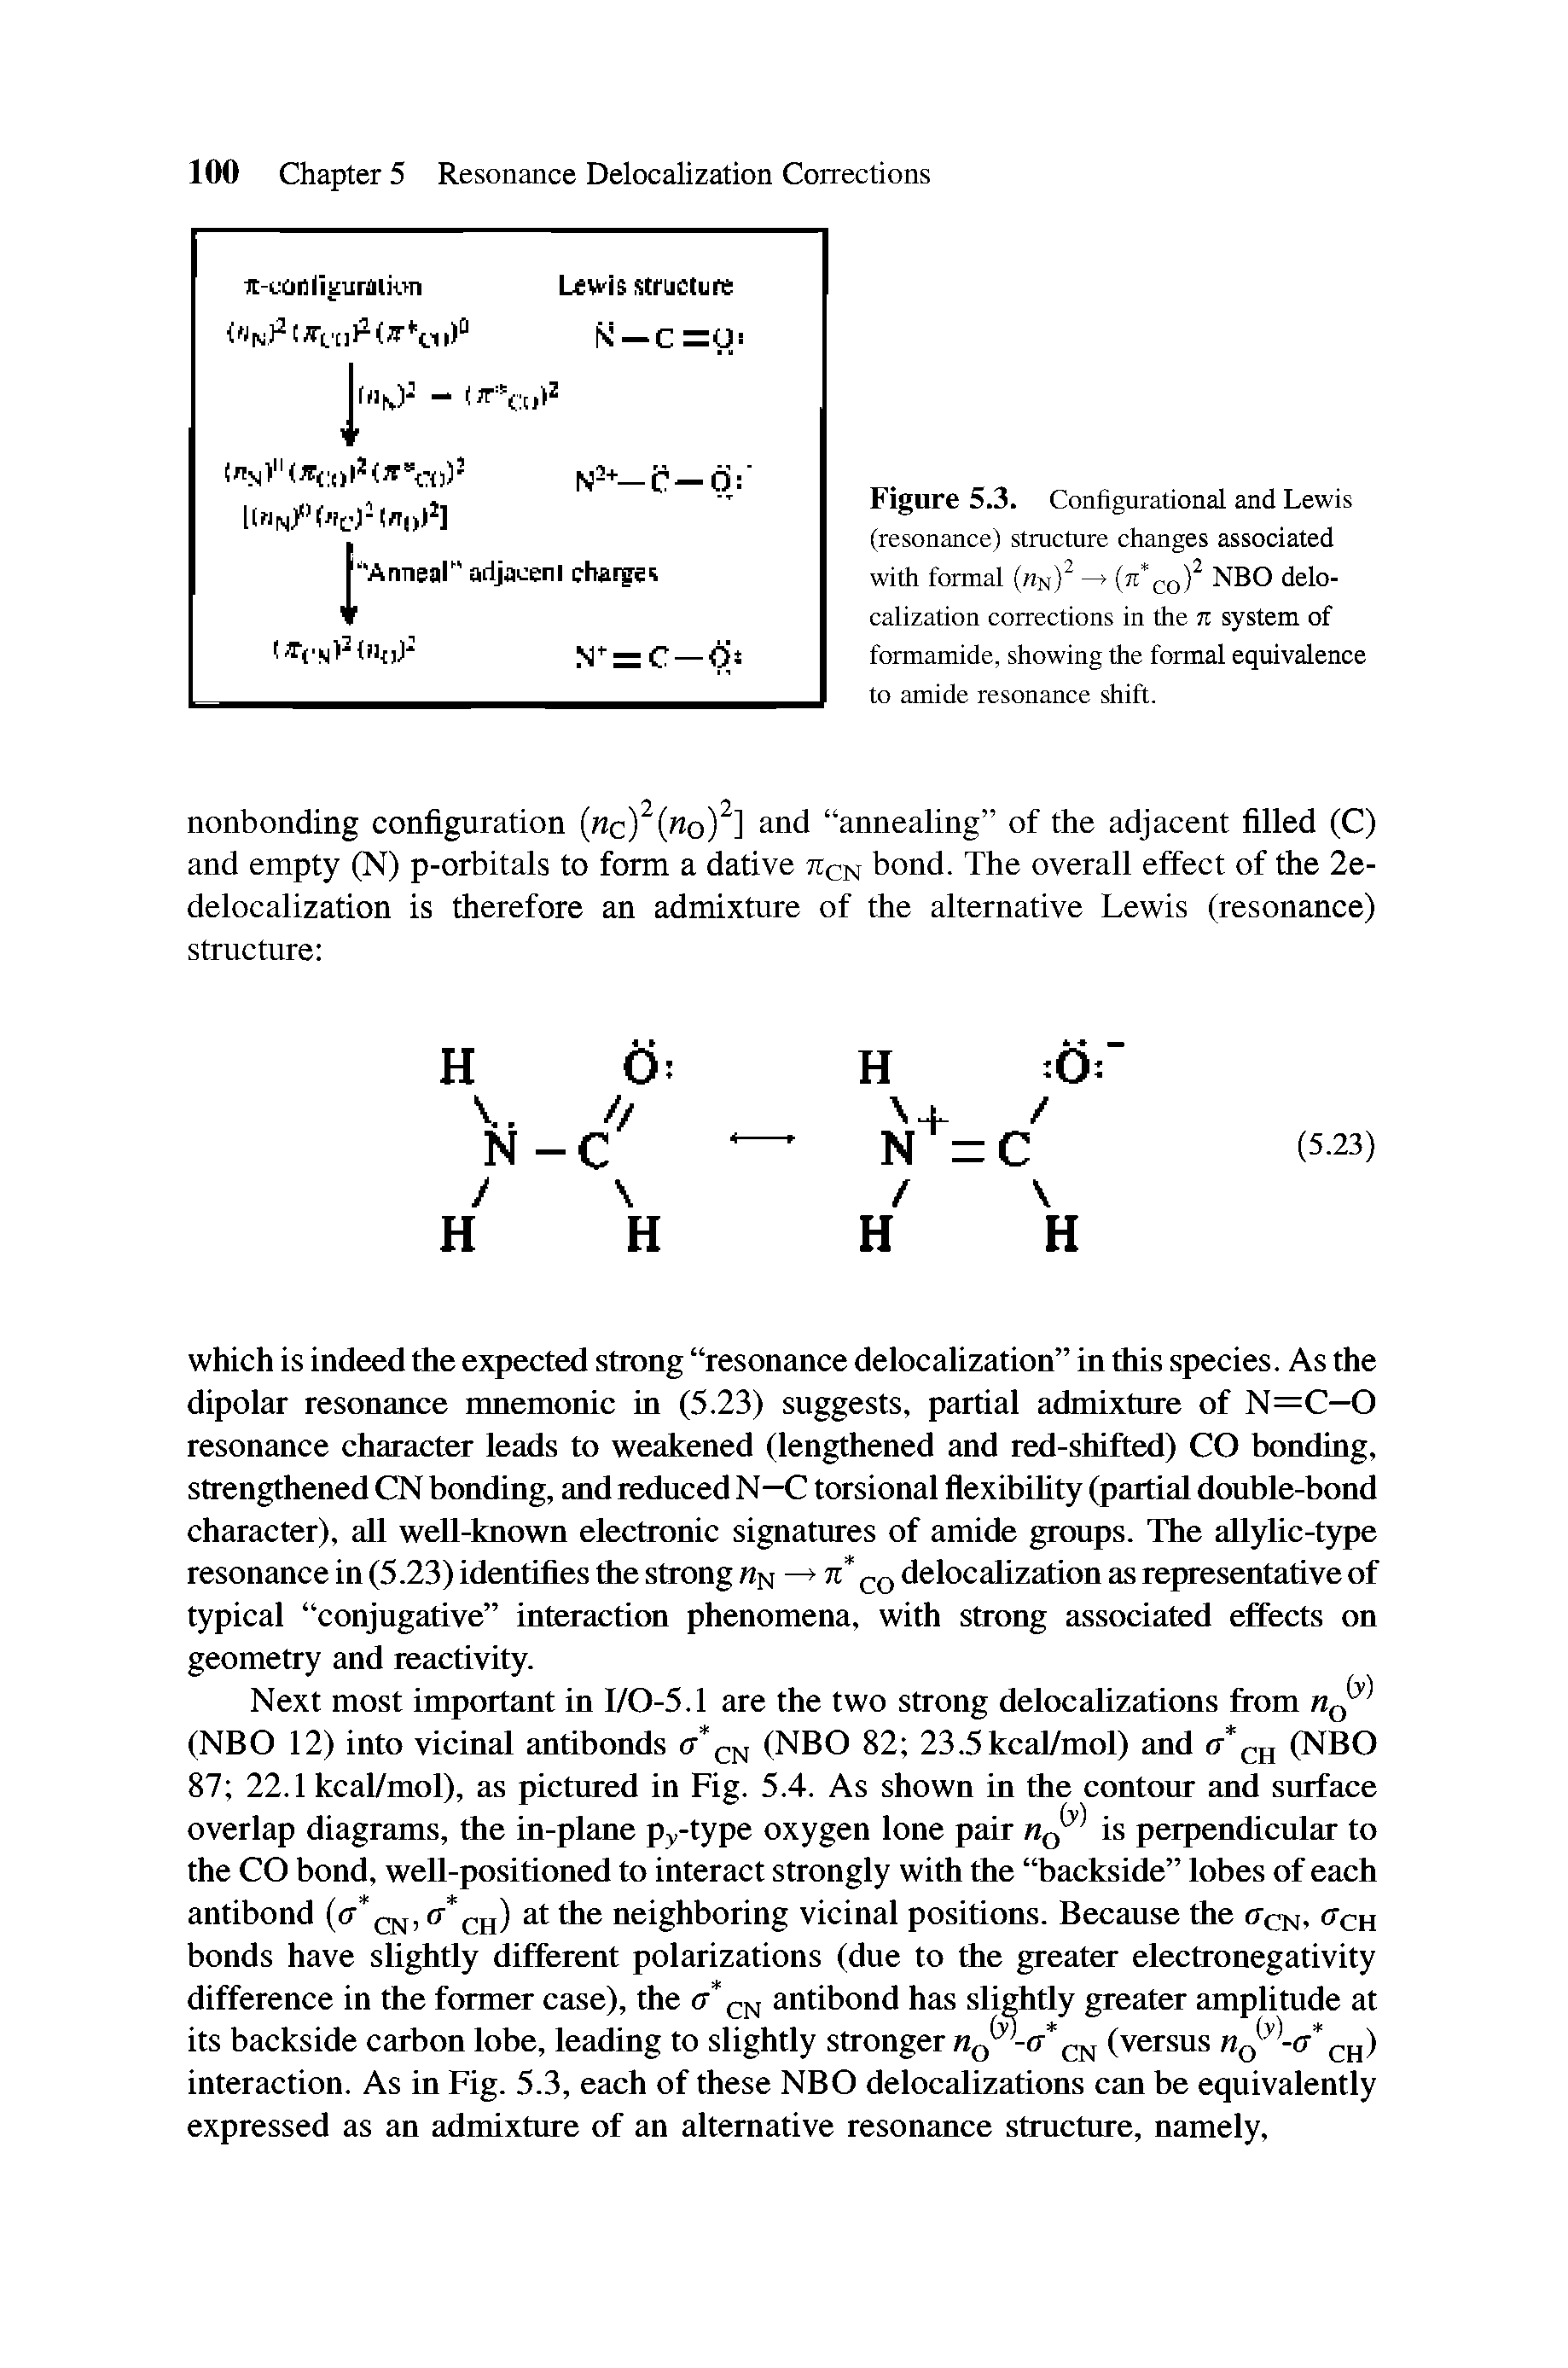 Figure 5.3. Configurational and Lewis (resonance) structure changes associated with formal (un) (tt co) NBO delocalization corrections in the n system of formamide, showing the formal equivalence to amide resonance shift.